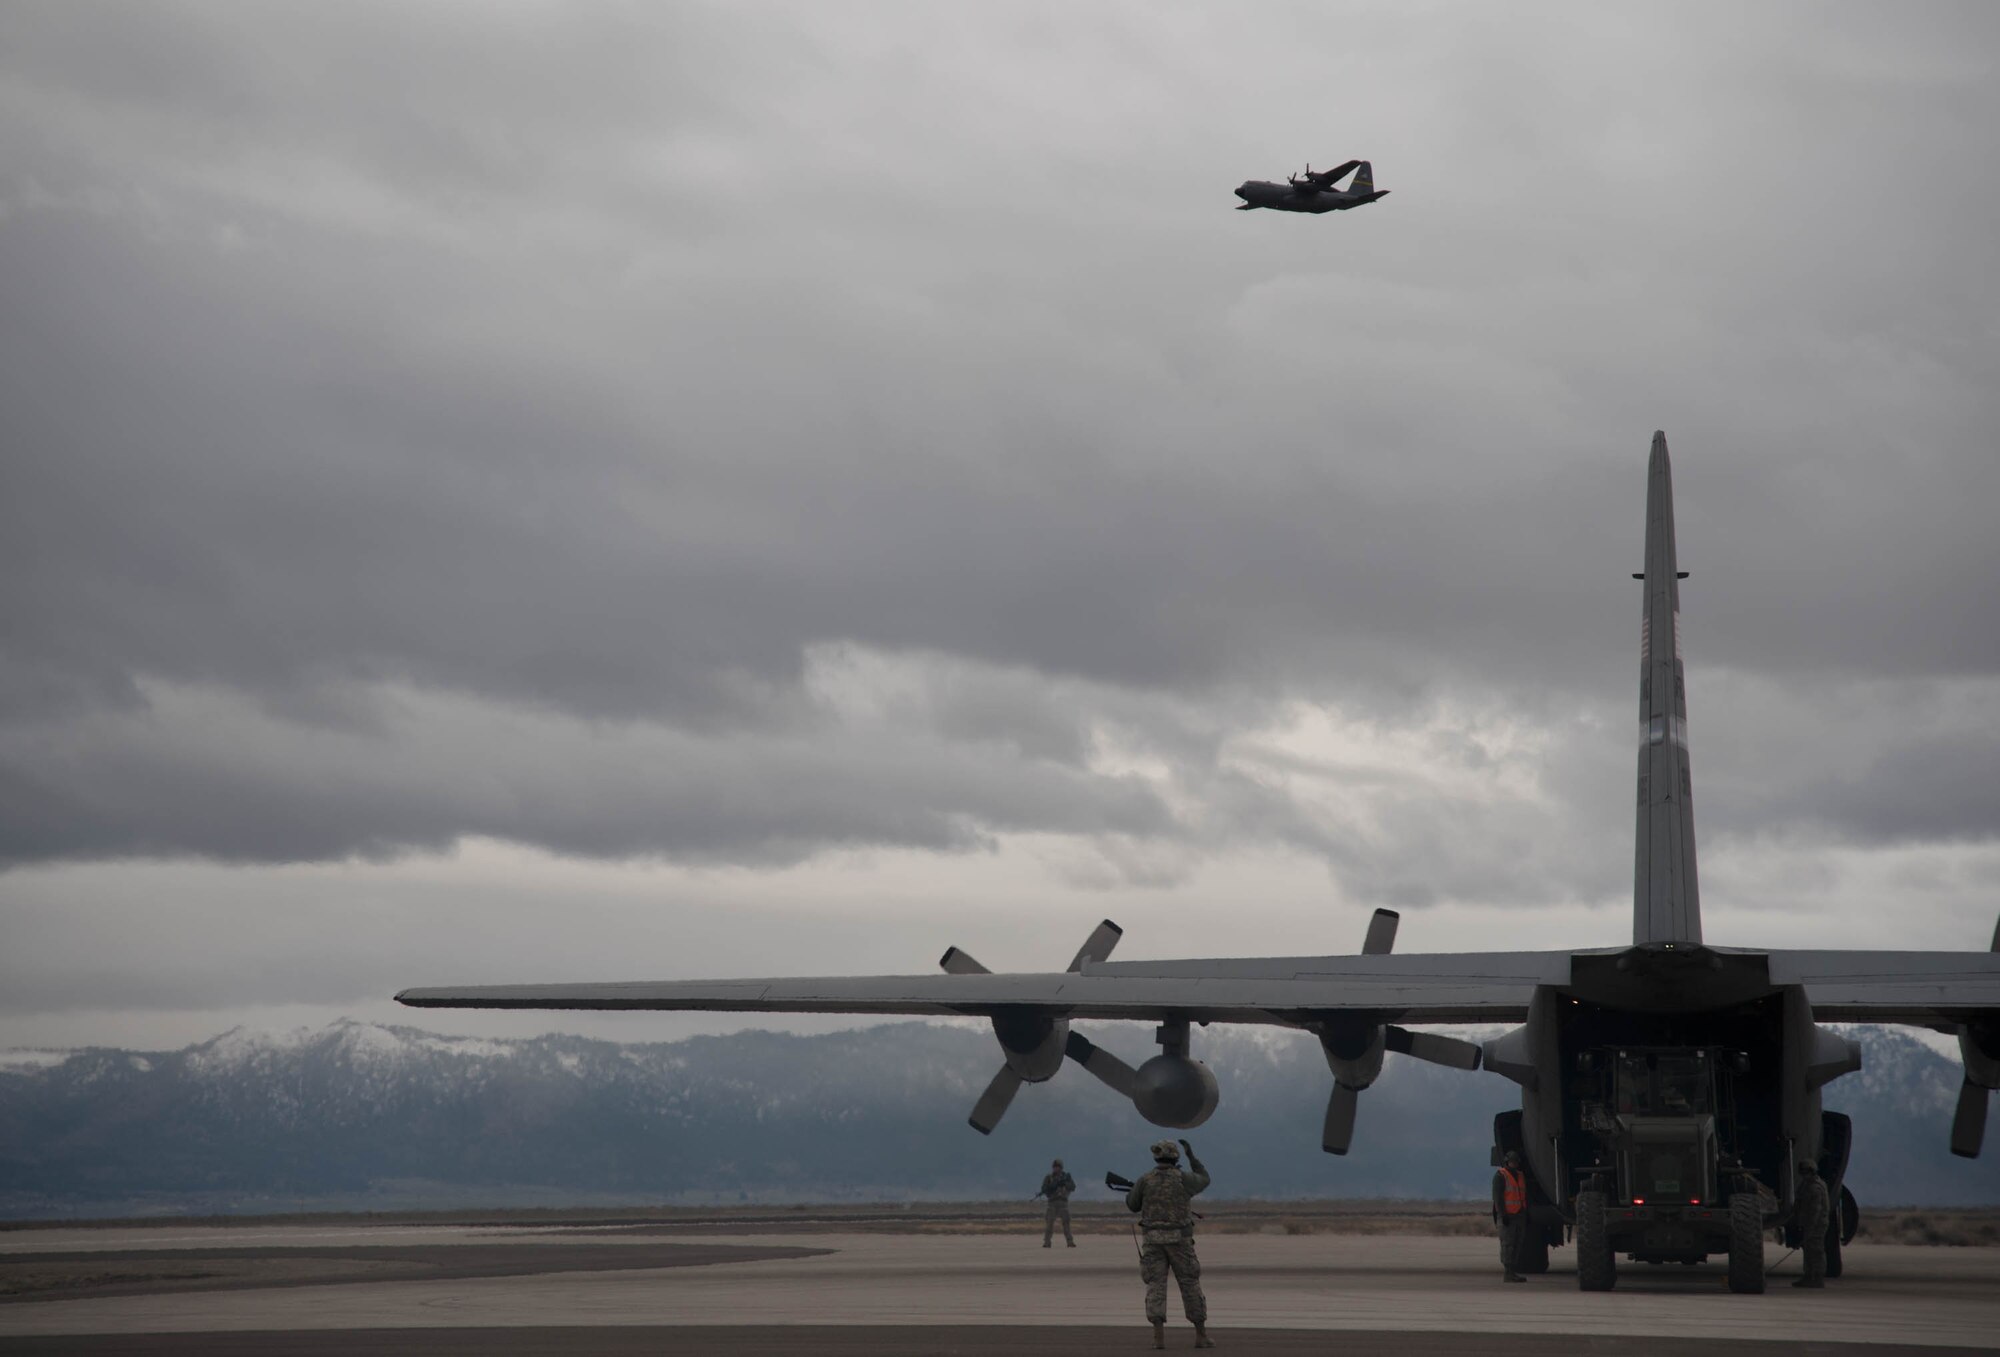 A C-130 Hercules aircraft from the Wyoming Air National Guard delivers cargo to Amedee Army Airfield, Calif., in support of Operation Lumberjack on March 8, 2016. The Kentucky Air National Guard’s 123rd Contingency Response Group is working in conjunction with the U.S. Army’s 688th Rapid Port Opening Element and a team from the Defense Logistics Agency to operate Joint Task Force-Port Opening Sangala during the week-long exercise. The objective of the JTF-PO is to establish an aerial port of debarkation, provide initial distribution capability and set up warehousing for distribution beyond a forward node. (Kentucky Air National Guard photo by 1st Lt. James Killen)